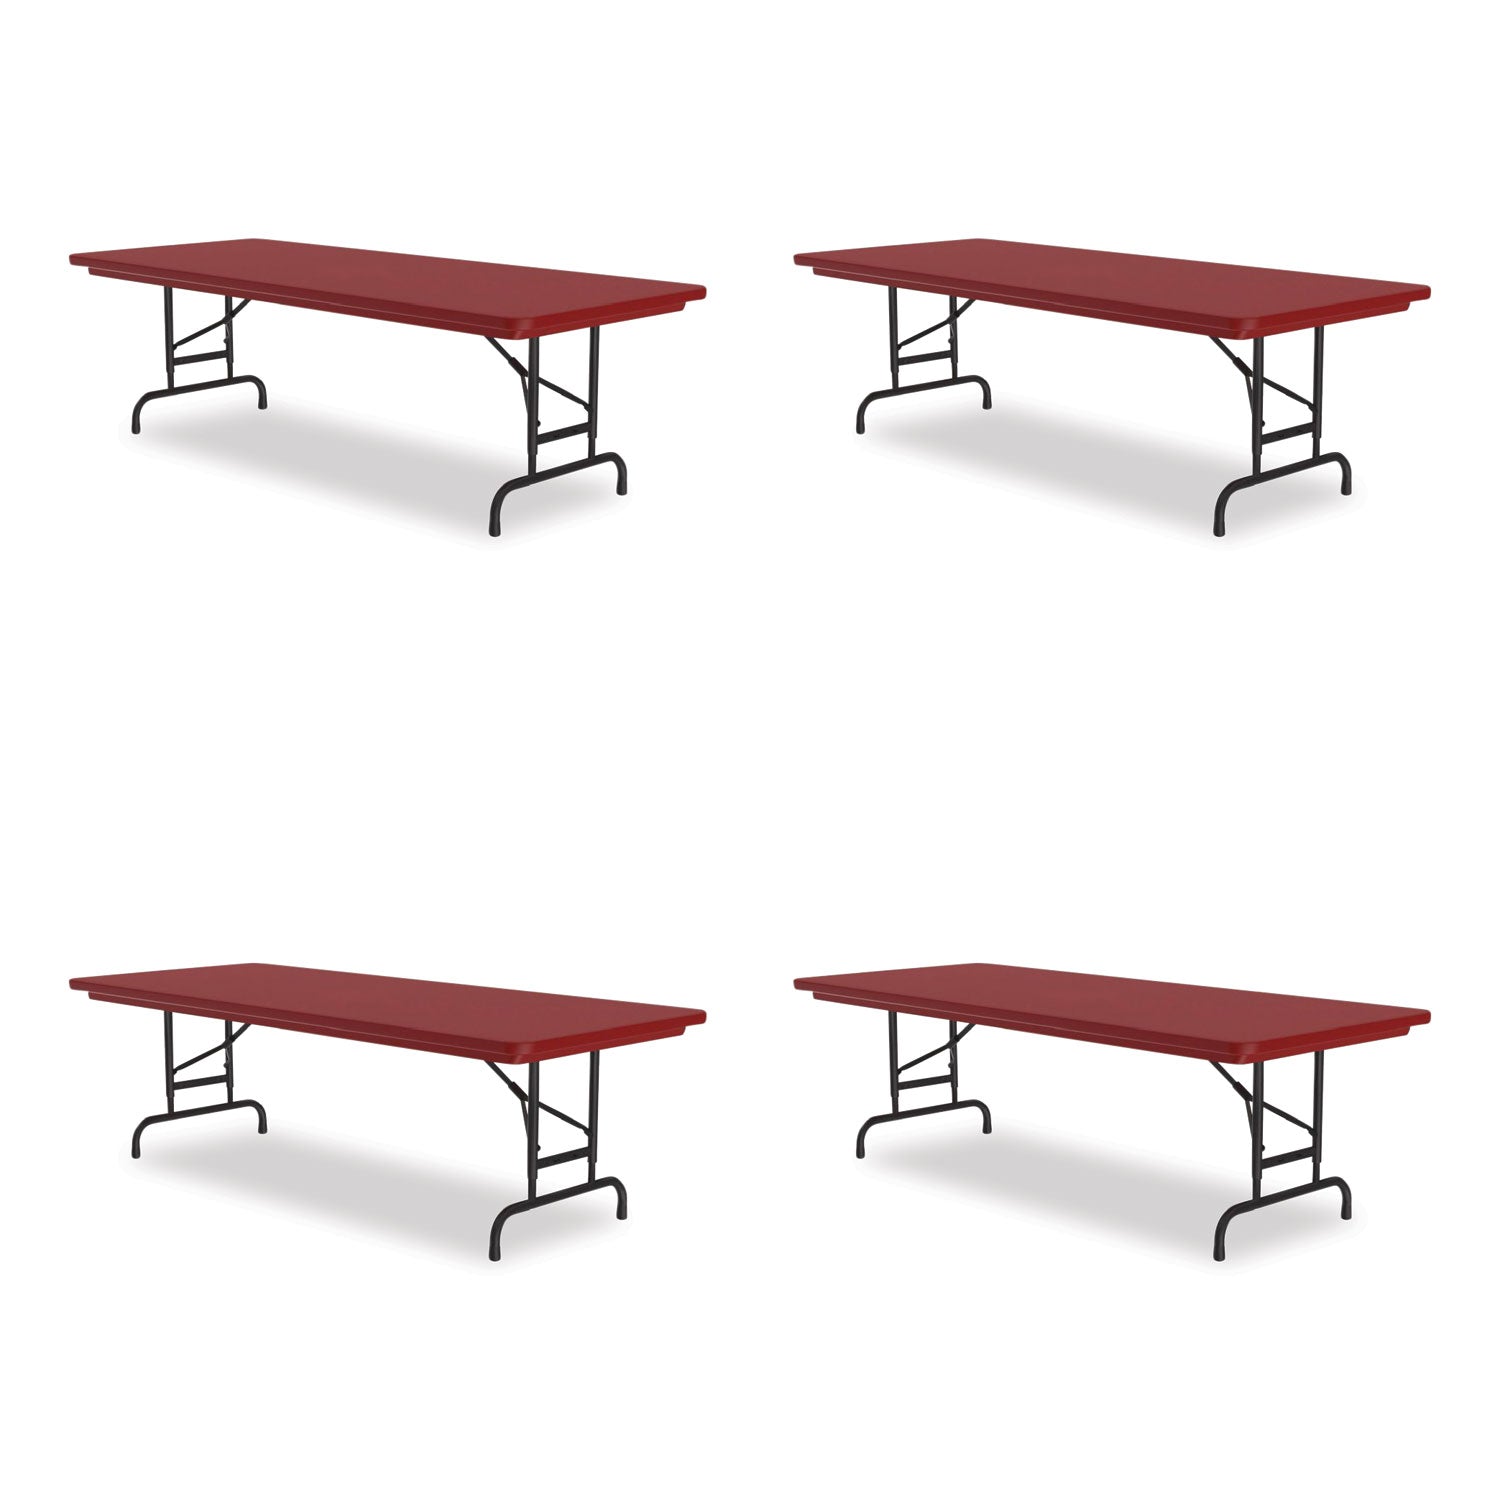 adjustable-folding-tables-rectangular-72-x-30-x-22-to-32-red-top-black-base-4-pallet-ships-in-4-6-business-days_crlra3072254p - 1